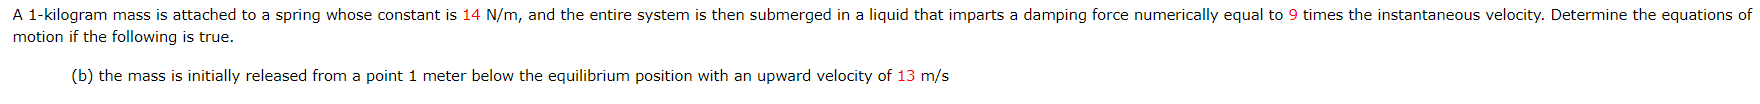 A 1-kilogram mass is attached to a spring whose constant is 14 N/m, and the entire system is then submerged in a liquid that imparts a damping force numerically equal to 9 times the instantaneous velocity. Determine the equations of
motion if the following is true.
(b) the mass is initially released from a point 1 meter below the equilibrium position with an upward velocity of 13 m/s
